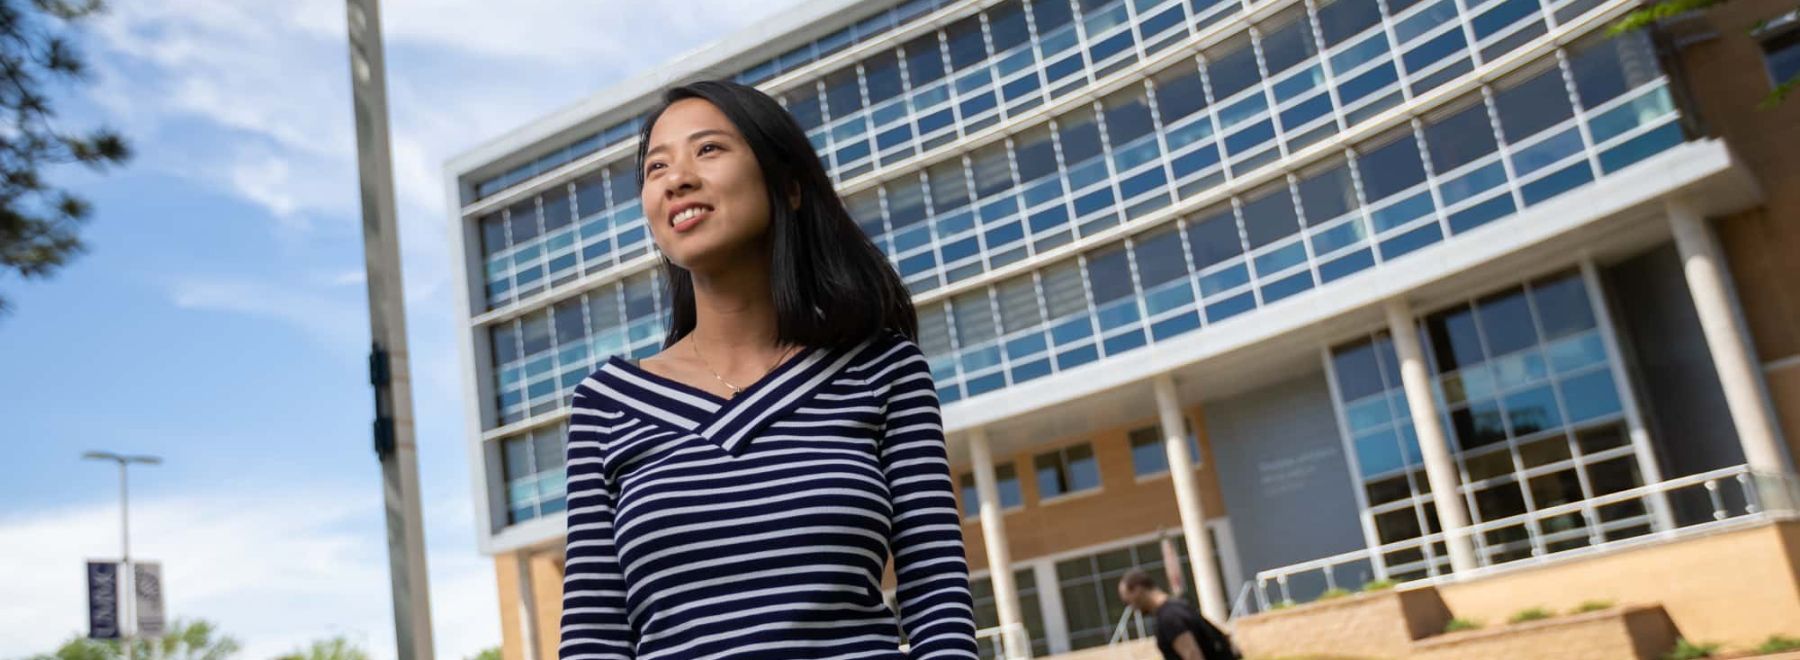 Female data science student poses outside translational research center